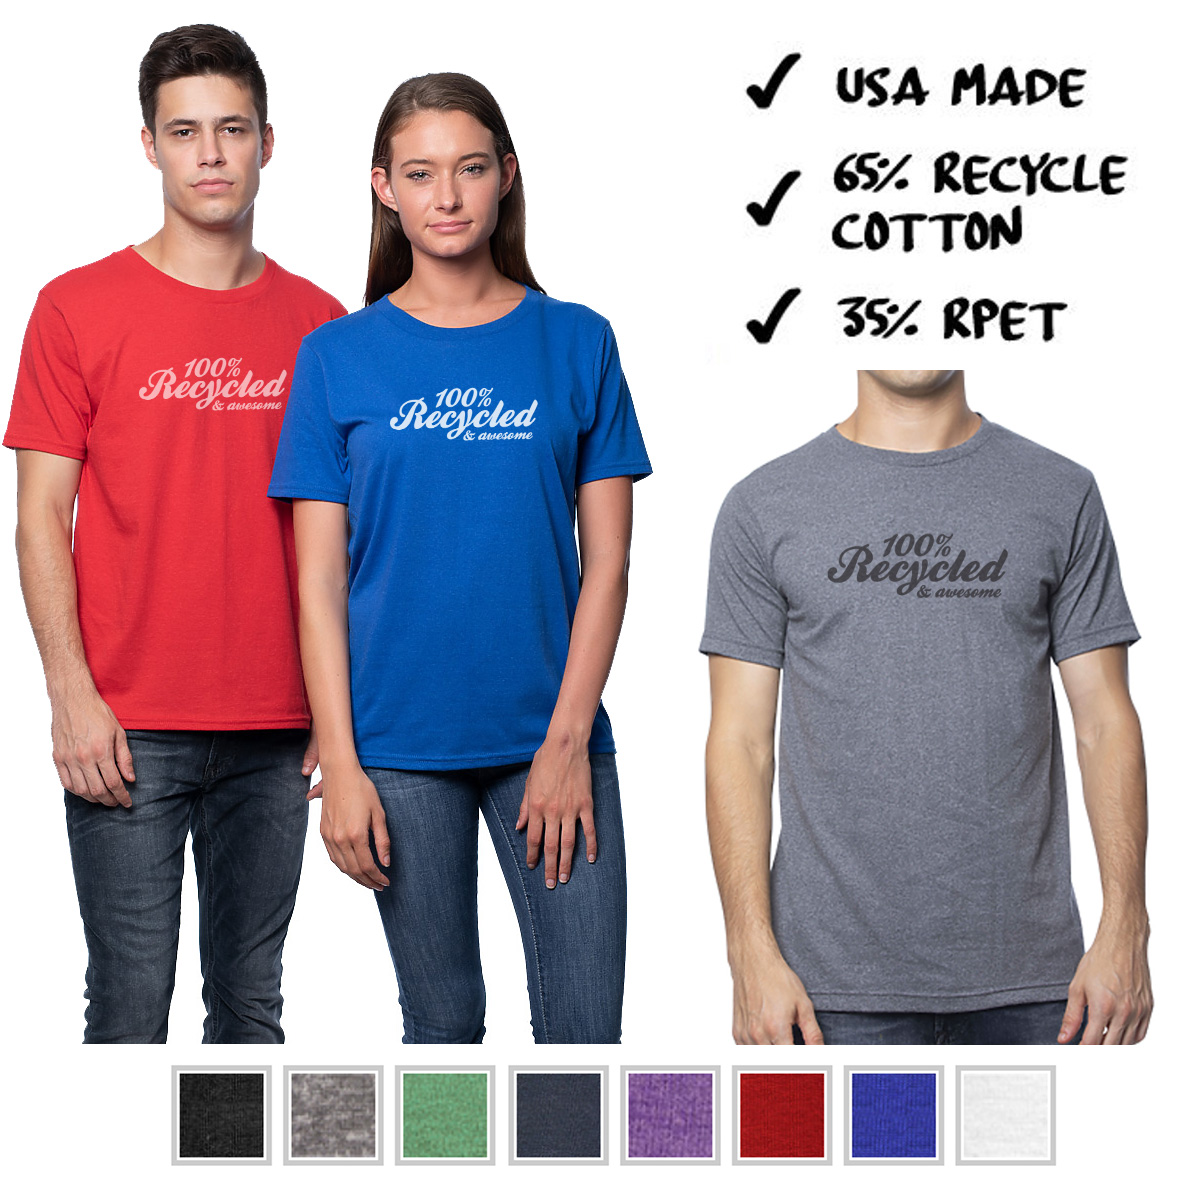 Recycled cotton RPET USA made unisex tshirt